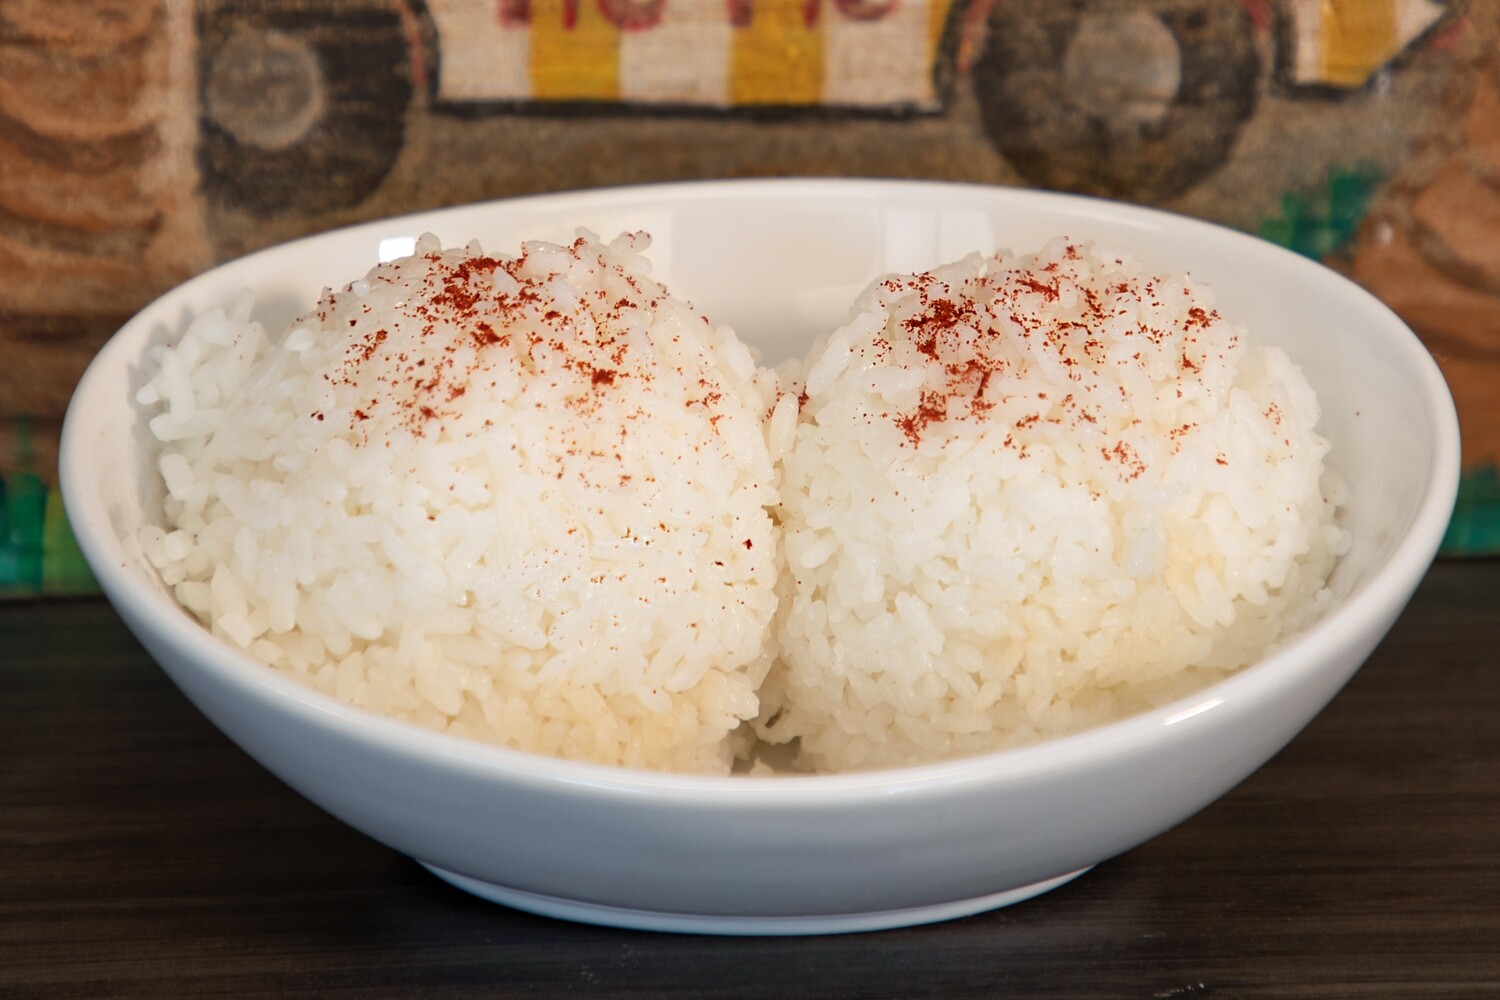 SIDE WHITE RICE (2 SCOOP)